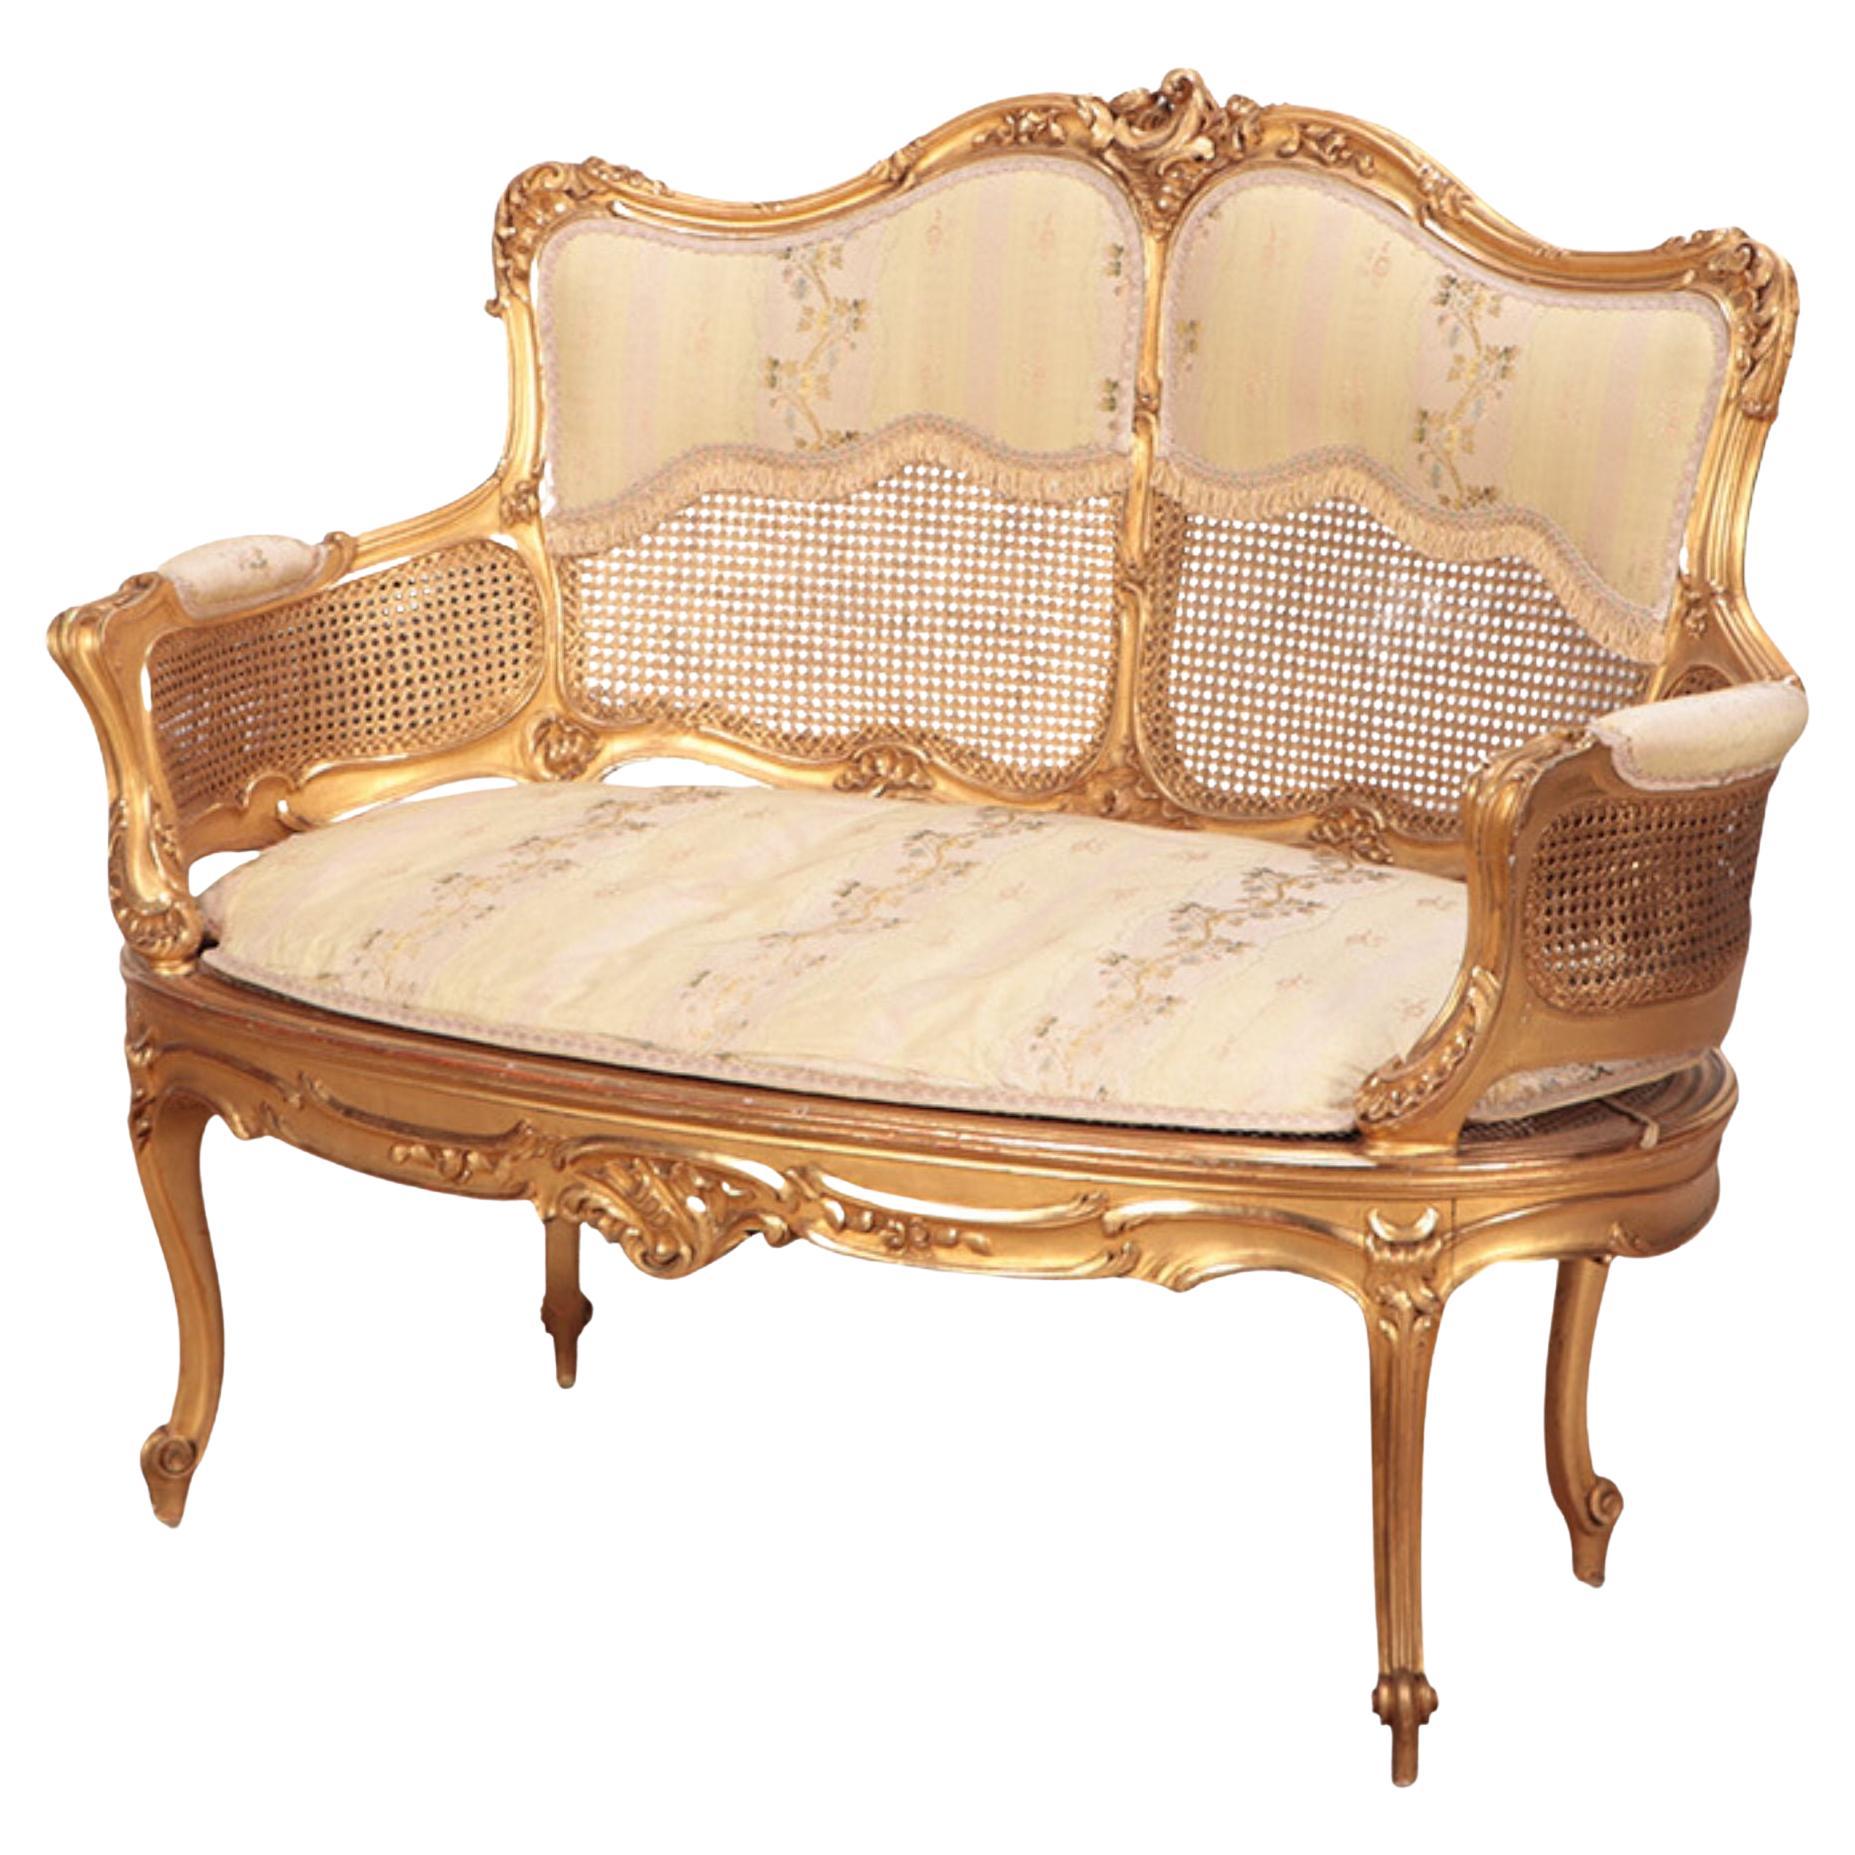 Giltwood and Carved French Louis XV Style Settee, circa 1900